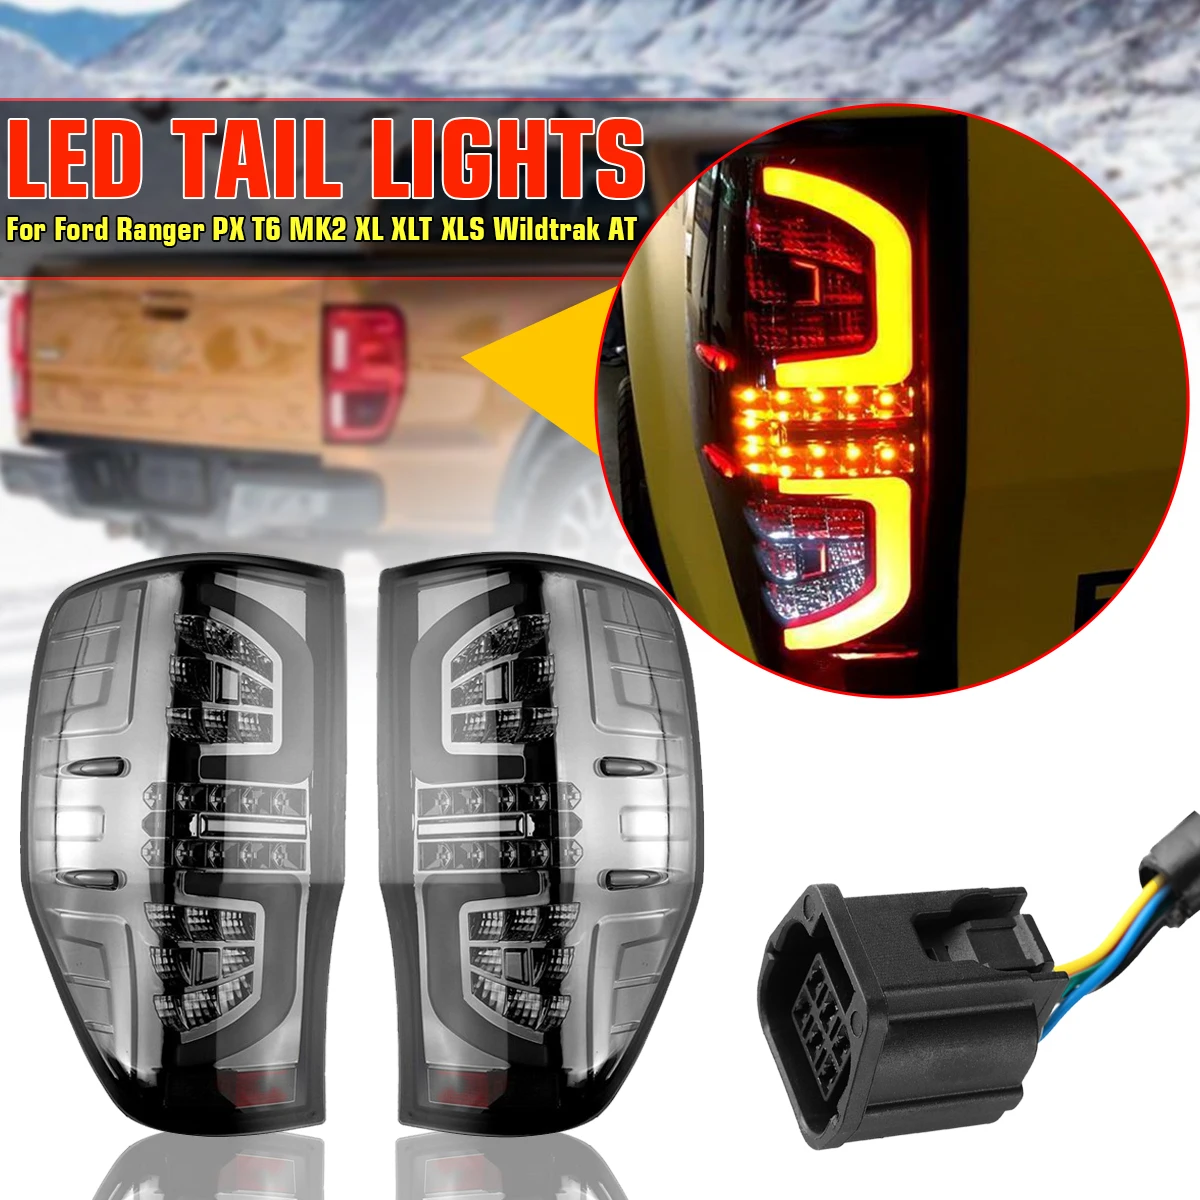 

1Pair for Ford Ranger PX T6 MK2 XL XLT XLS Wildtrak AT Rear Tail Lights Lamp Smoked LED Making Installation Breeze Match Factory